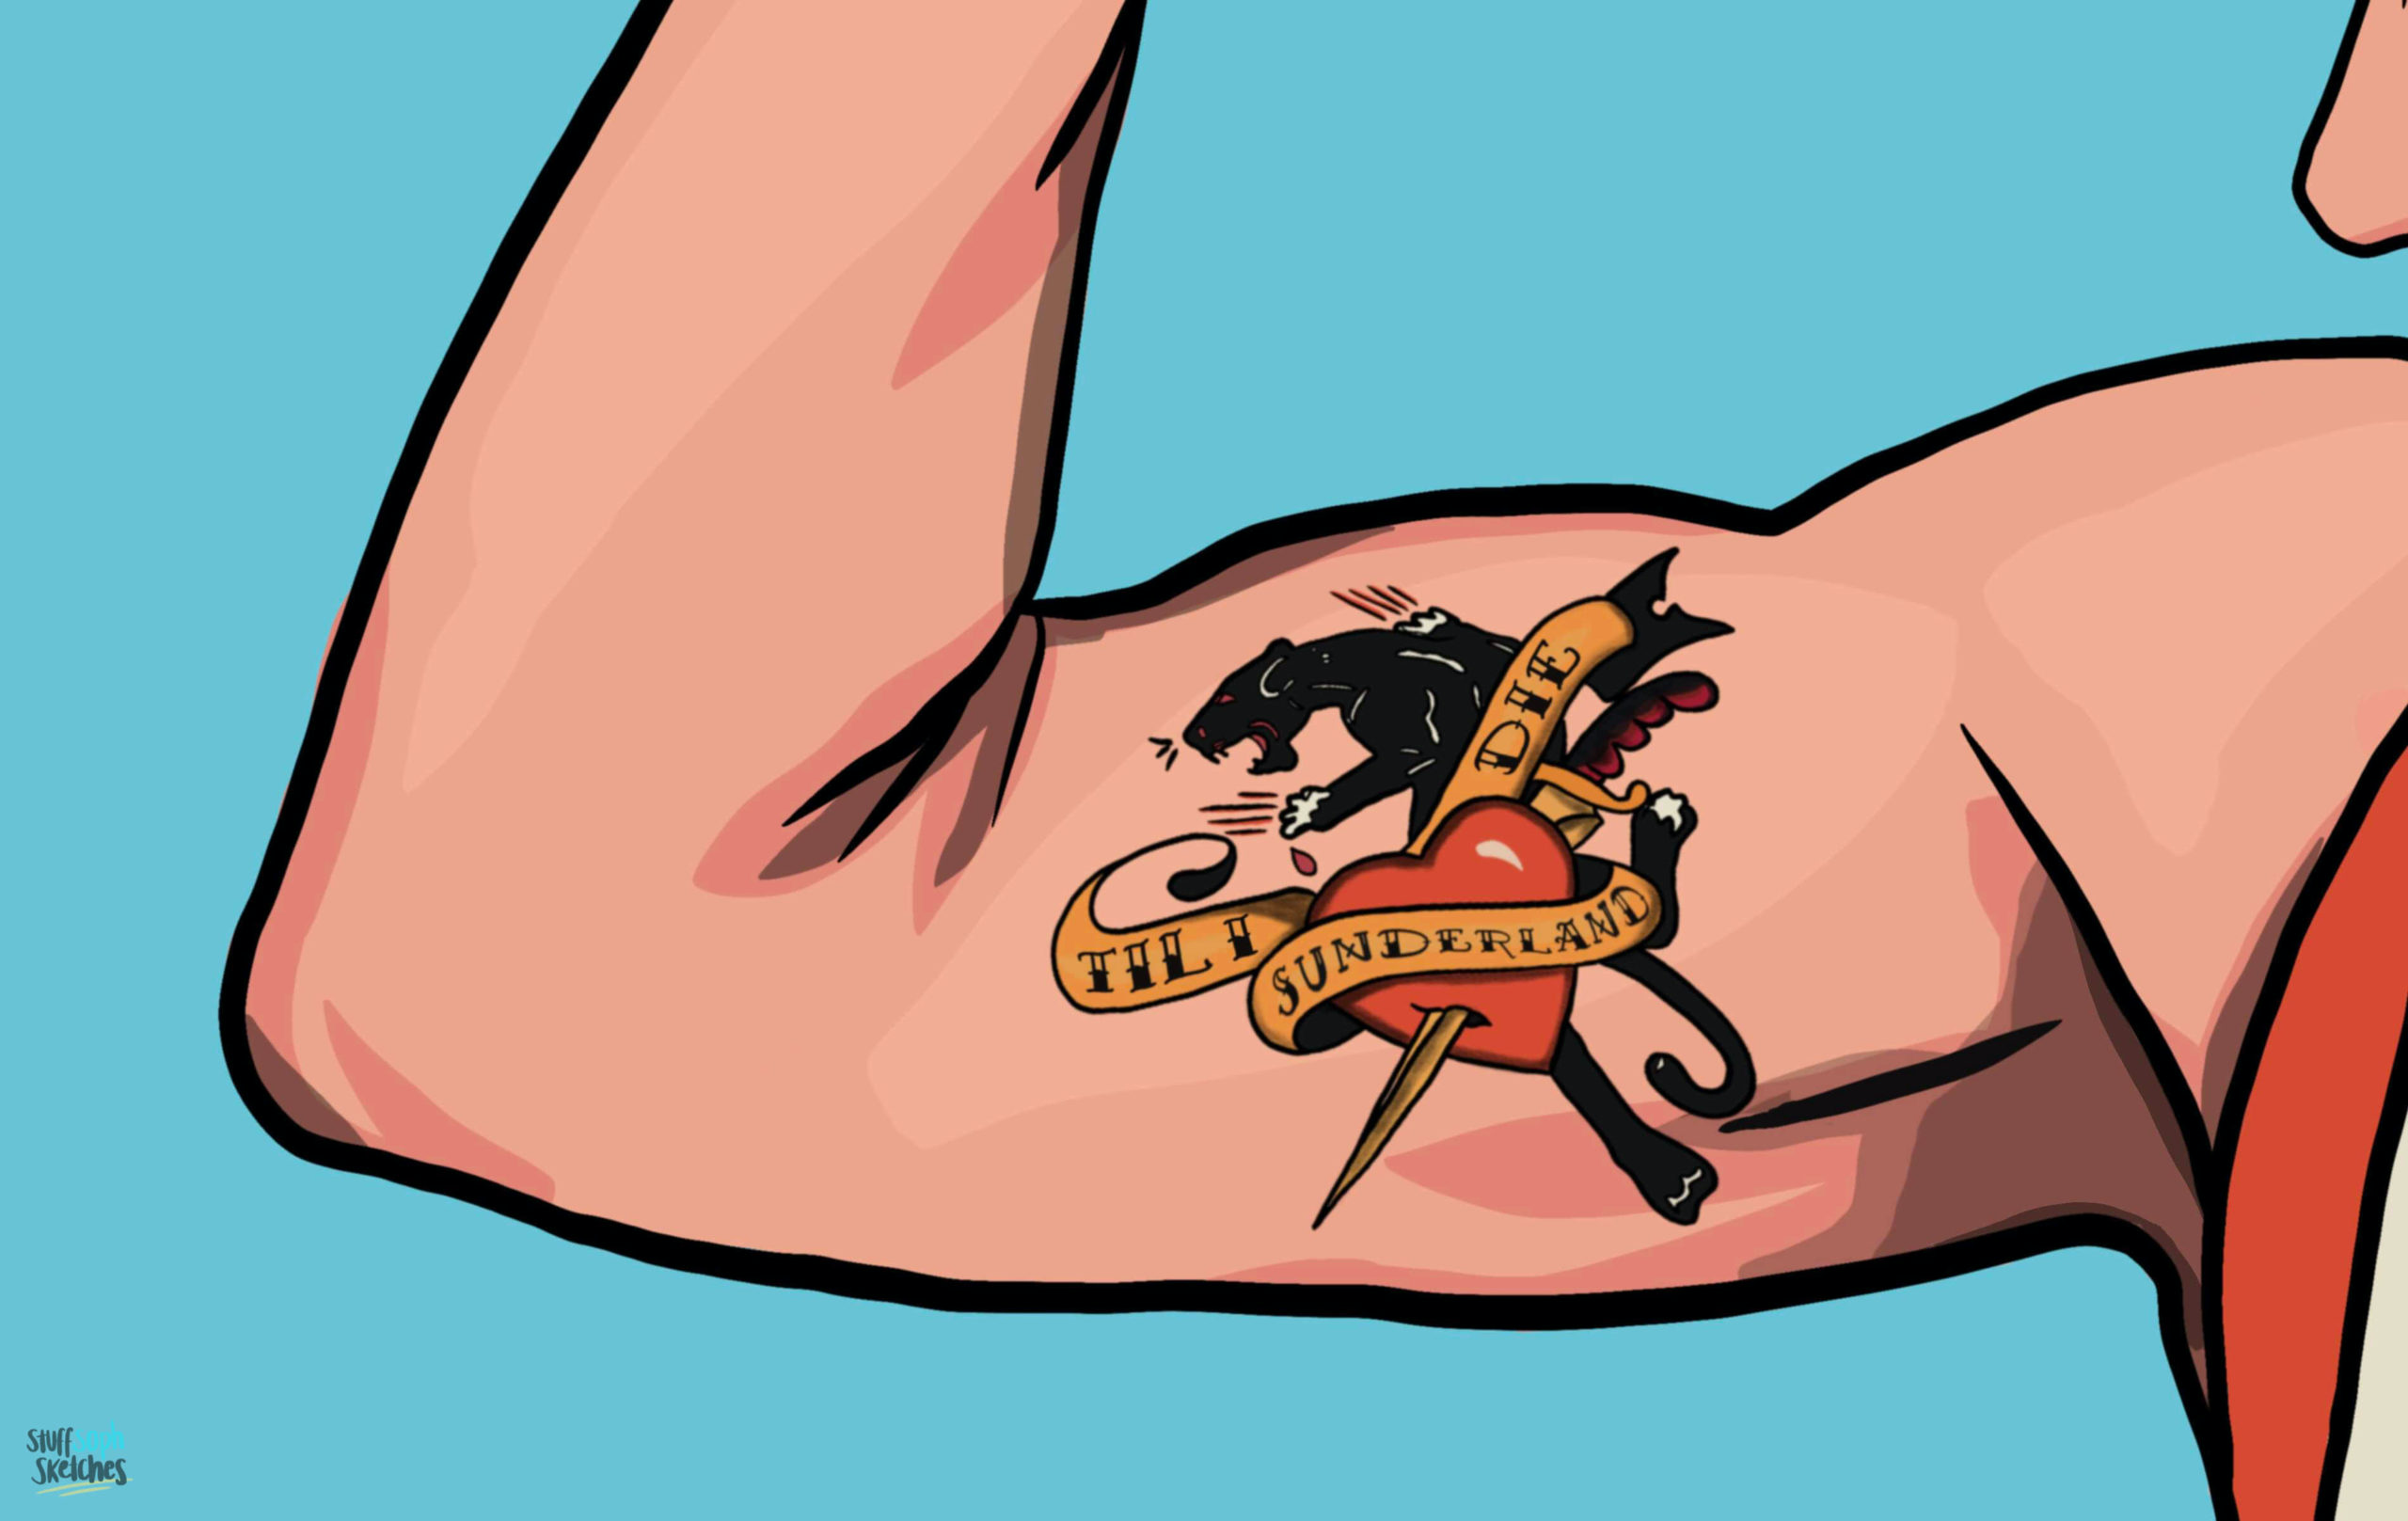 A mans Bicep with a tattoo of a black cat and sunderland til i die